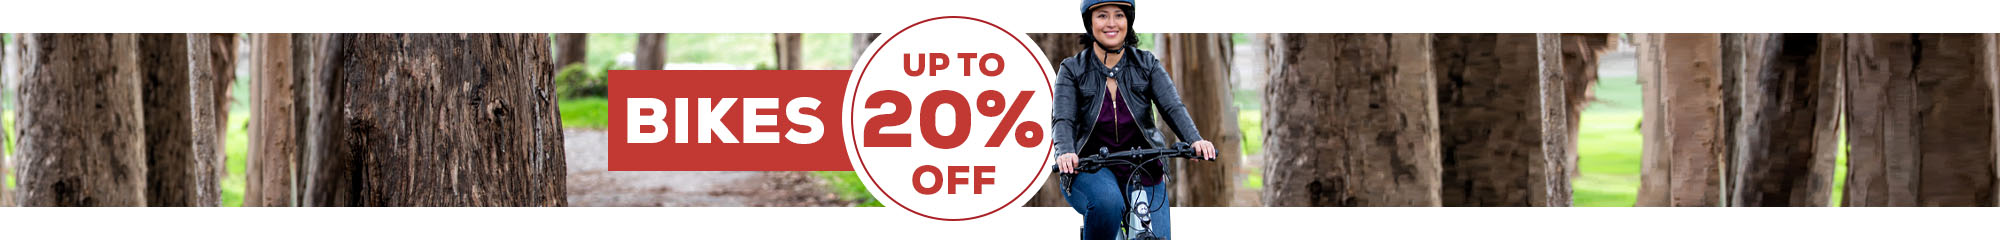 Bikes up to 20% Off